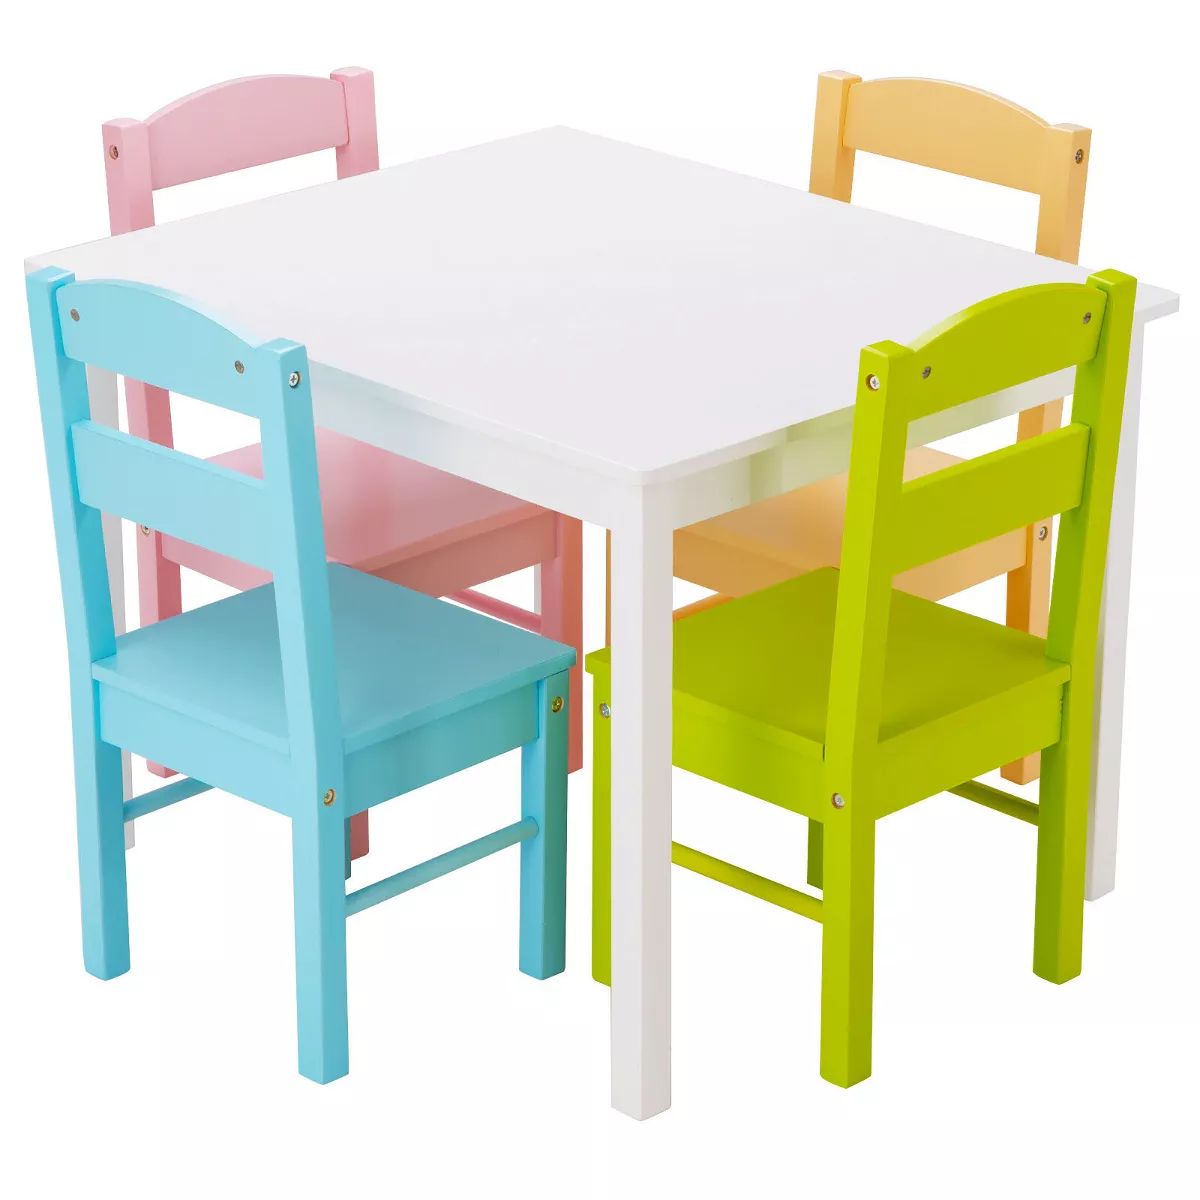 Costway 5 Piece Kids Wood Table Chair Set Activity Toddler Playroom Furniture Colorful | Target